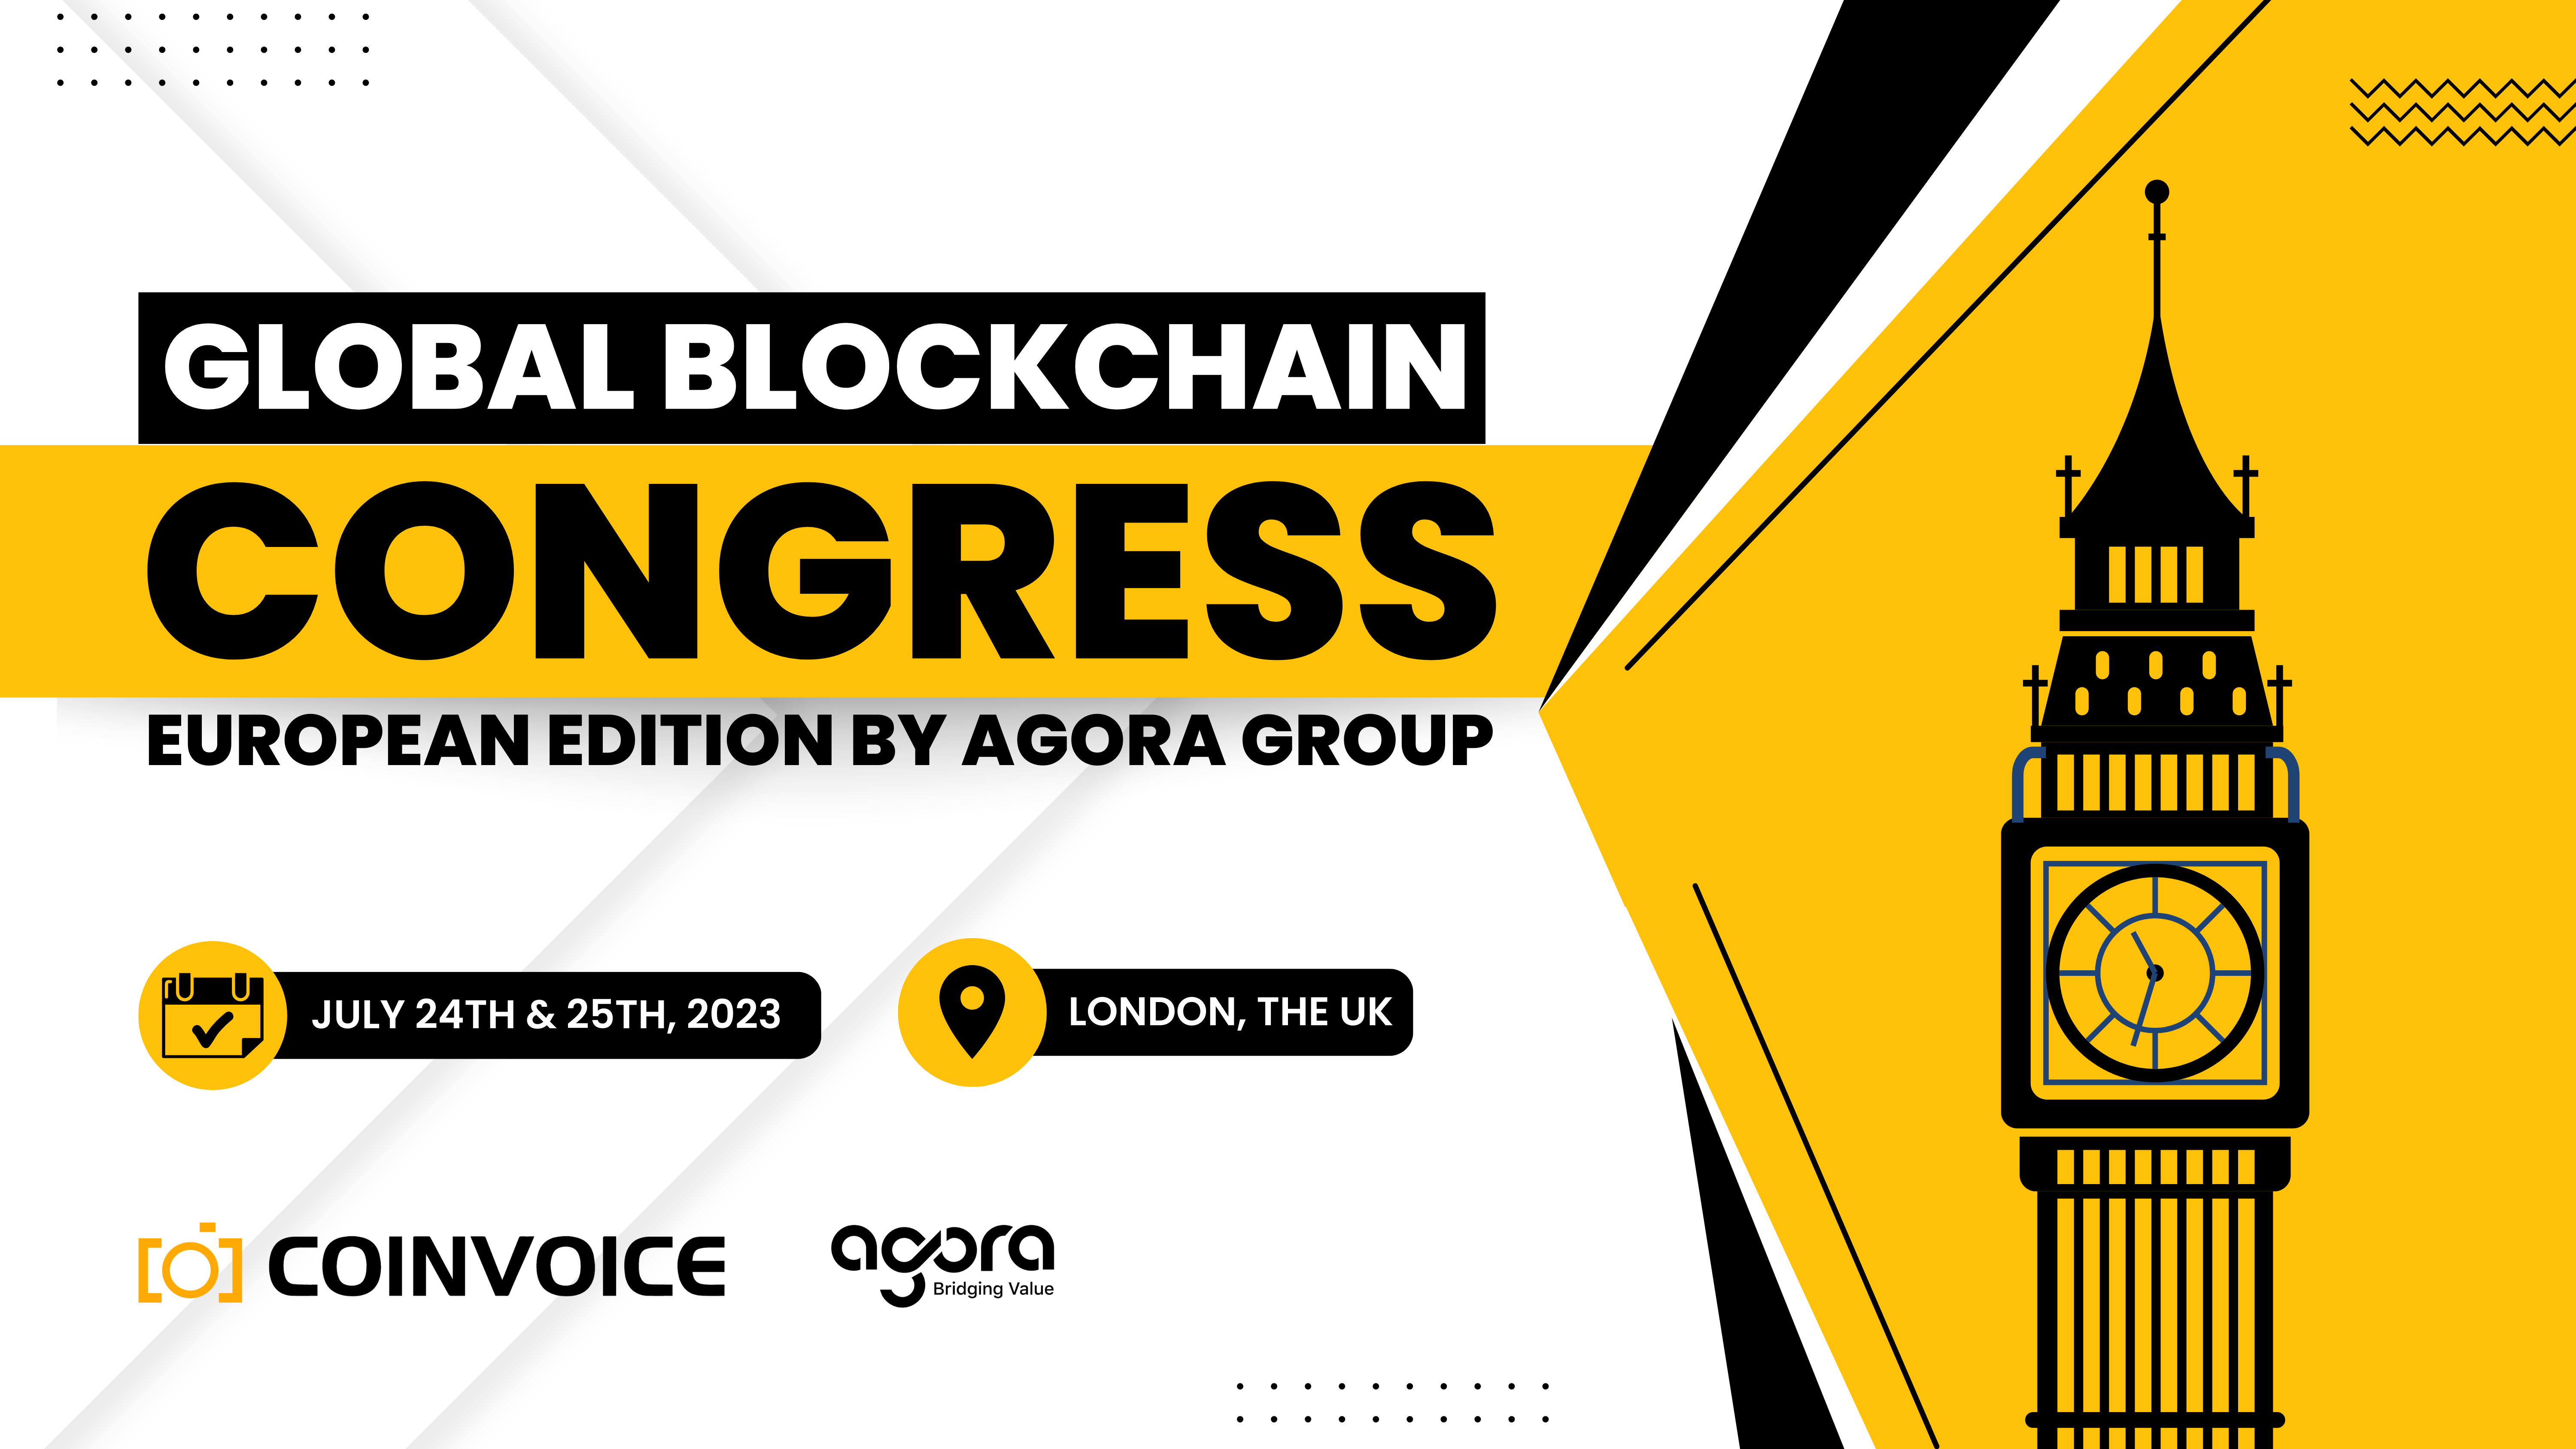 Global Blockchain Congress – European Edition by Agora Group on July 24th & 25th in London, the UK